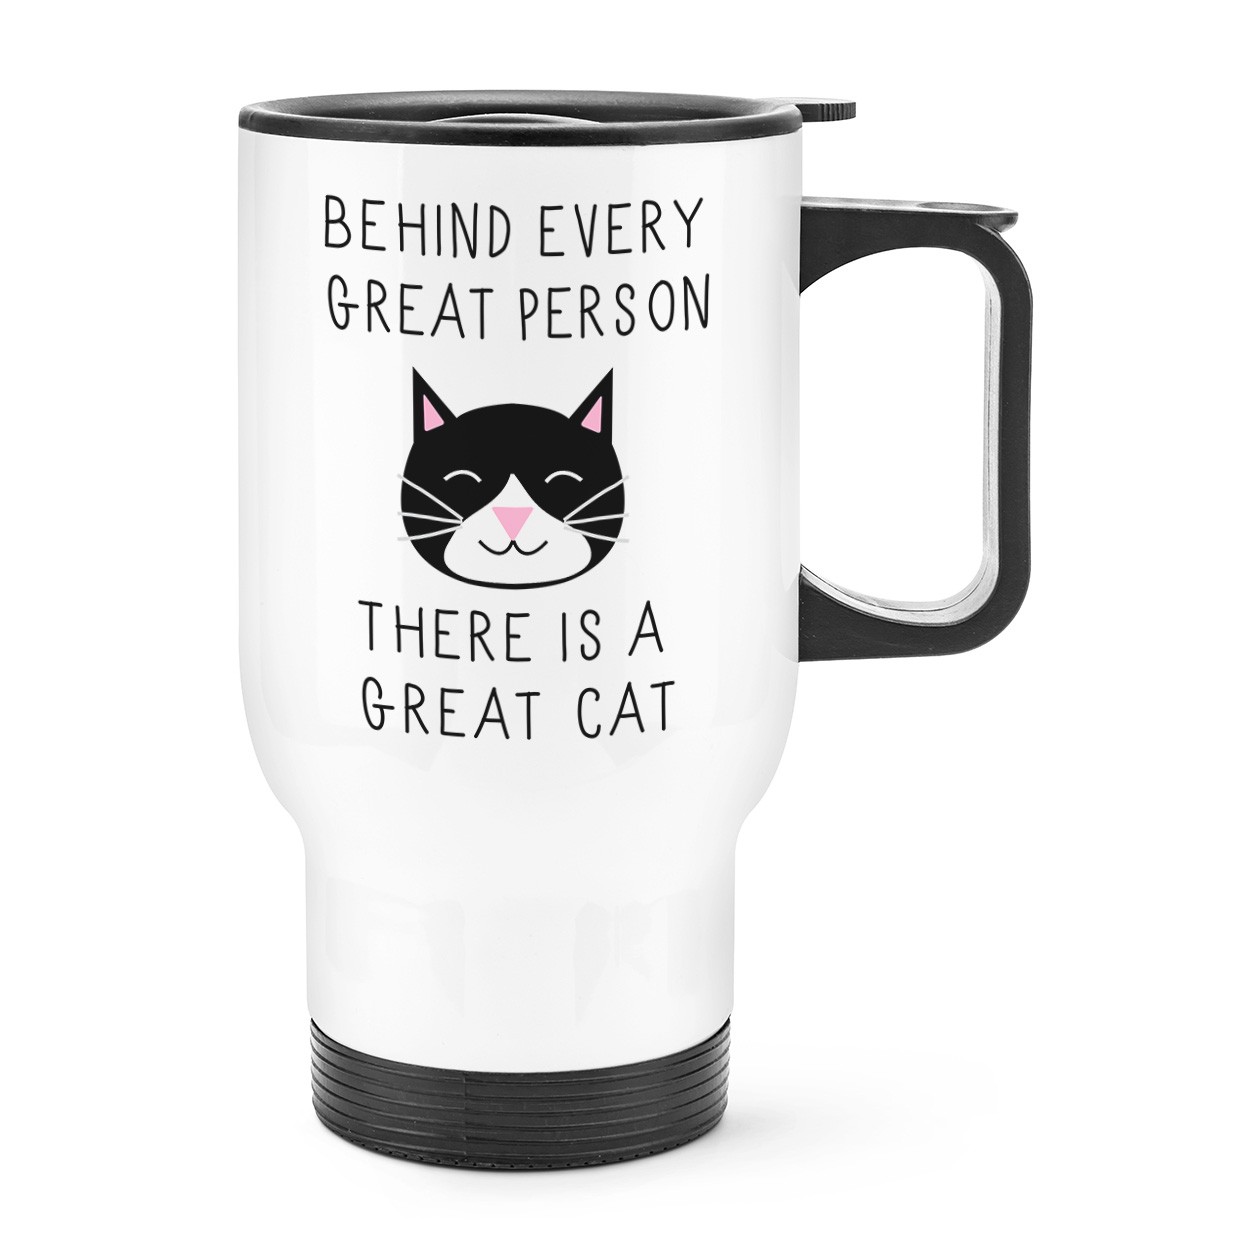 Behind Every Great Person Is A Great Cat Travel Mug Cup With Handle